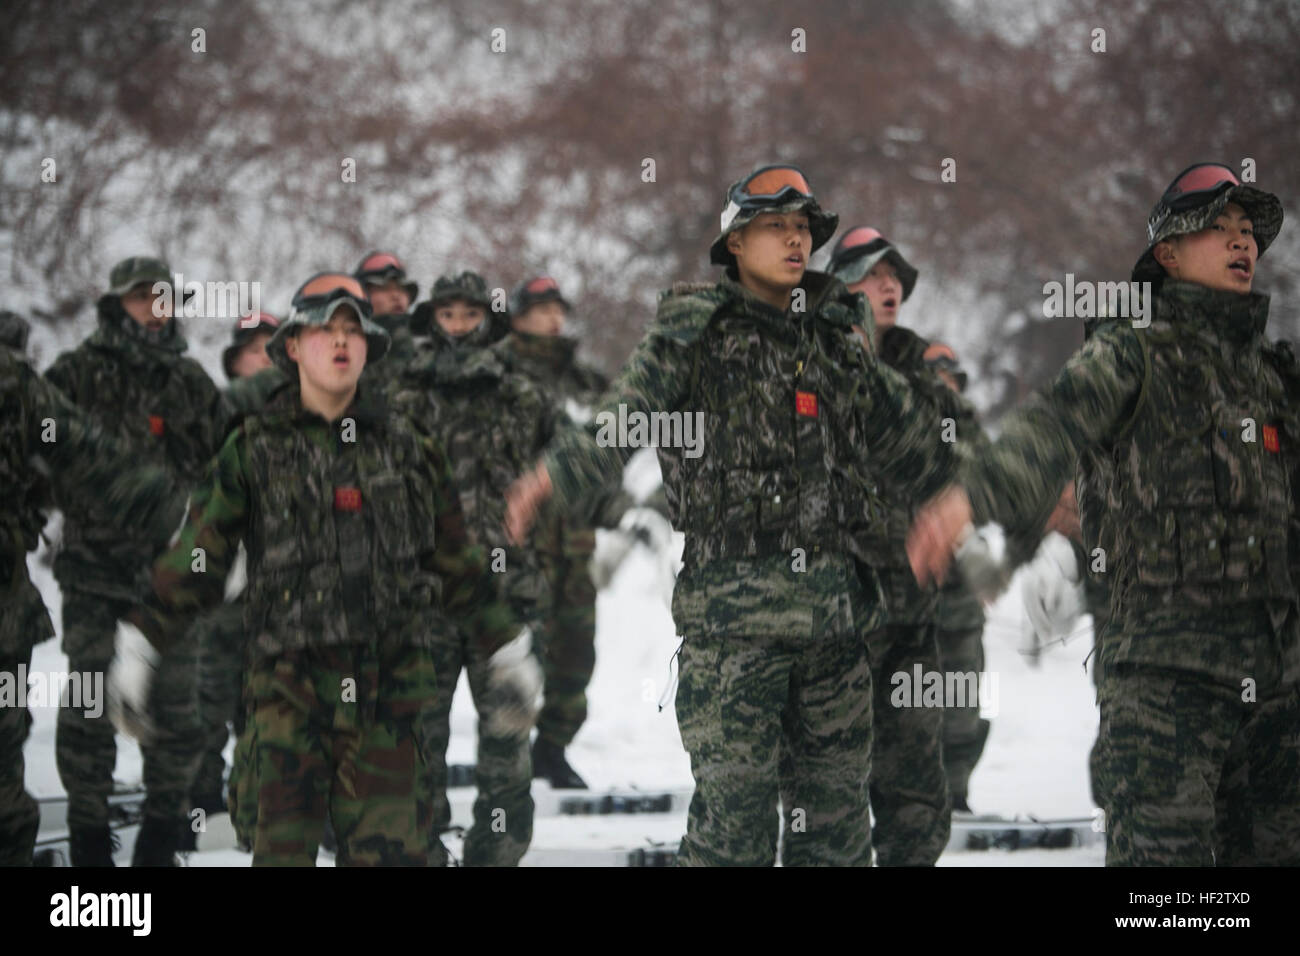 Republic of Korea Marines warm up for snow mobility training during Korean Marine Exchange Program 15-3  Jan. 26 in Pyeongchang, Republic of Korea. The Marines were learning to ski for snow mobility training as part of mountain warfare training. Training included stopping, turning, proper falling techniques and how to quickly climb back up slopes with skis on. The ROK Marines are force reconnaissance men with Alpha Company, 2nd Battalion, 2nd Marine Division. (U.S. Marine Corps photo by Cpl. Tyler S. Giguere/Released) Snow skiing mobility training for Marines 150126-M-RZ020-015 Stock Photo